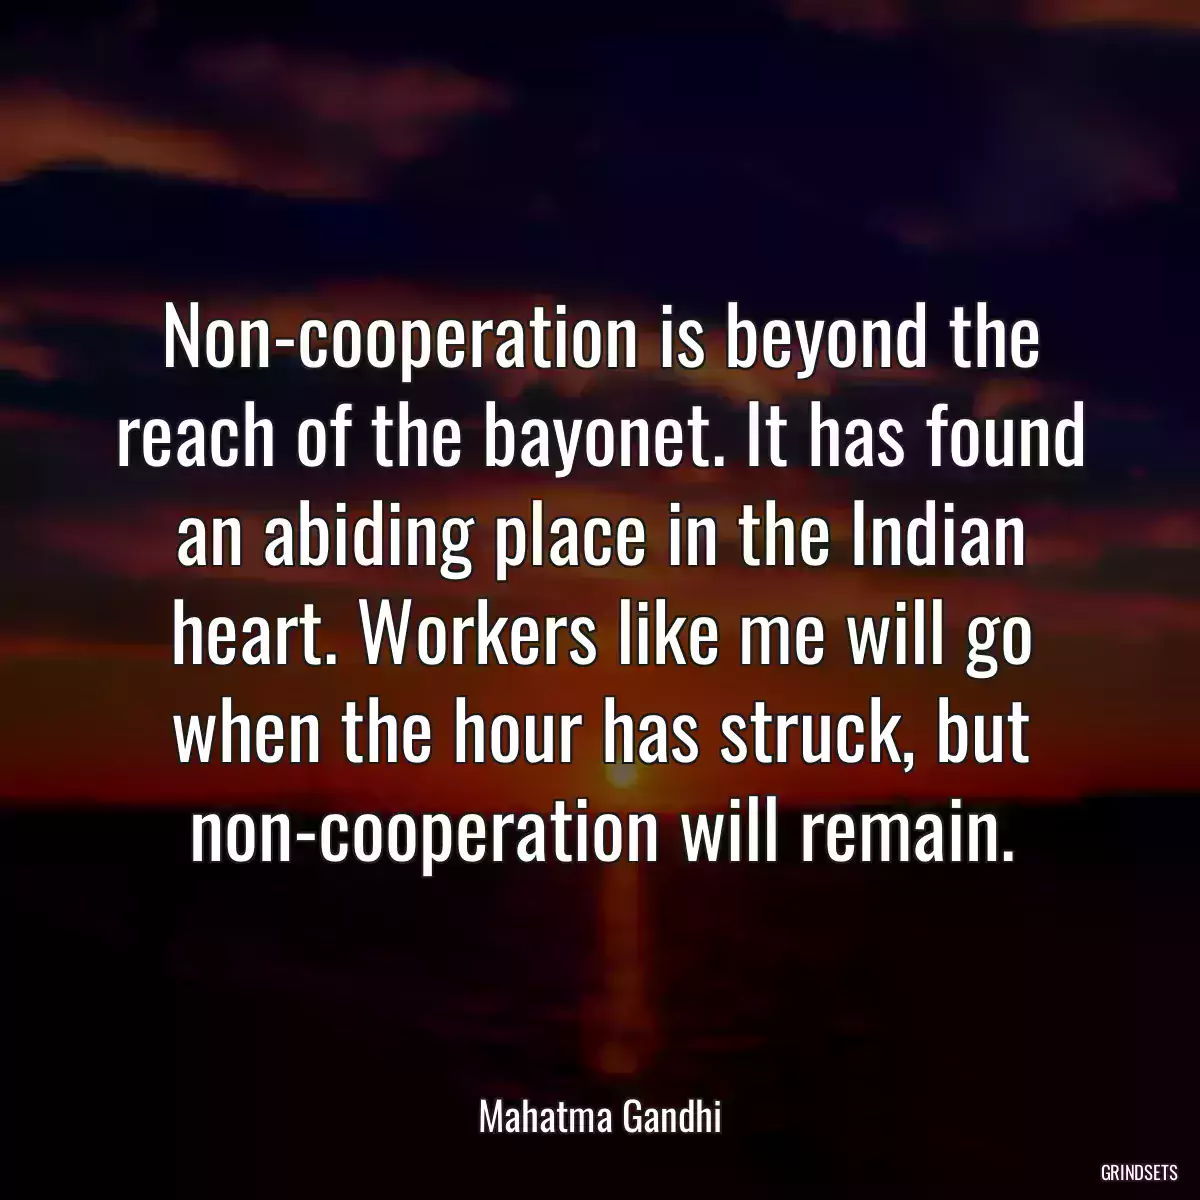 Non-cooperation is beyond the reach of the bayonet. It has found an abiding place in the Indian heart. Workers like me will go when the hour has struck, but non-cooperation will remain.